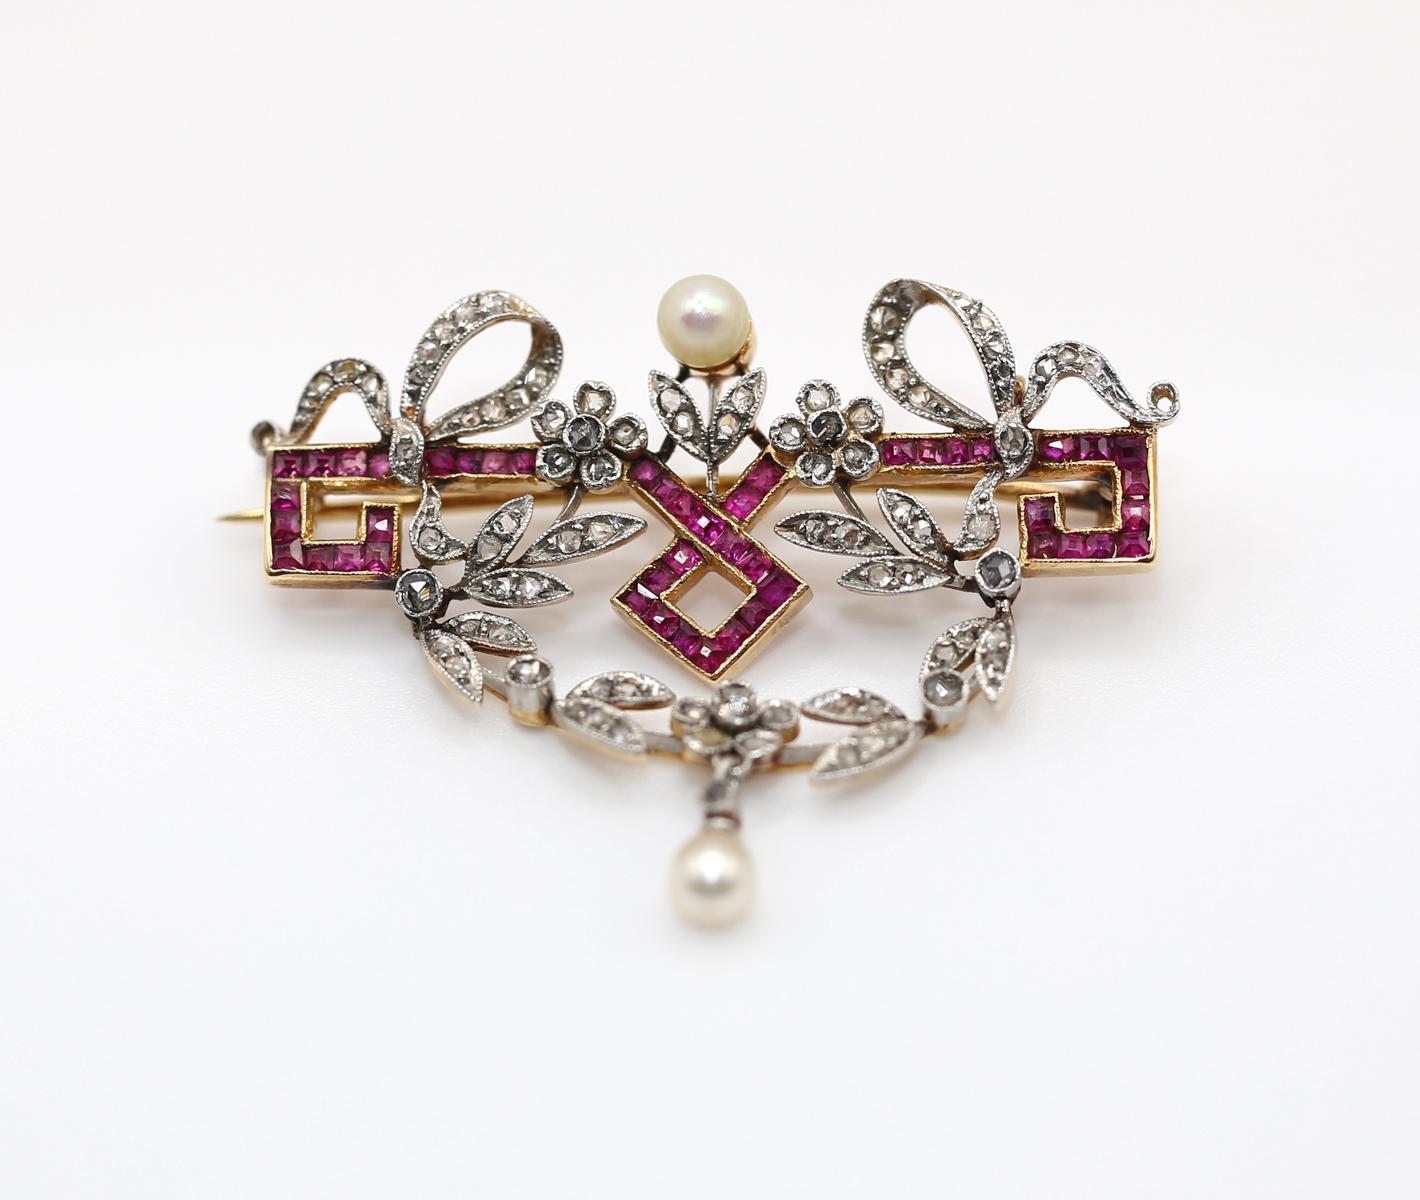 Belle Époque Brooch with Rubies, Pearls, and tiny Rose-cut Diamonds. Elegant and artistically crafted items of fine jewelry. Created around 1900 in France. 
A row of Rubies set to a geometrical line and squares form. 
Rose-cut Diamonds are set